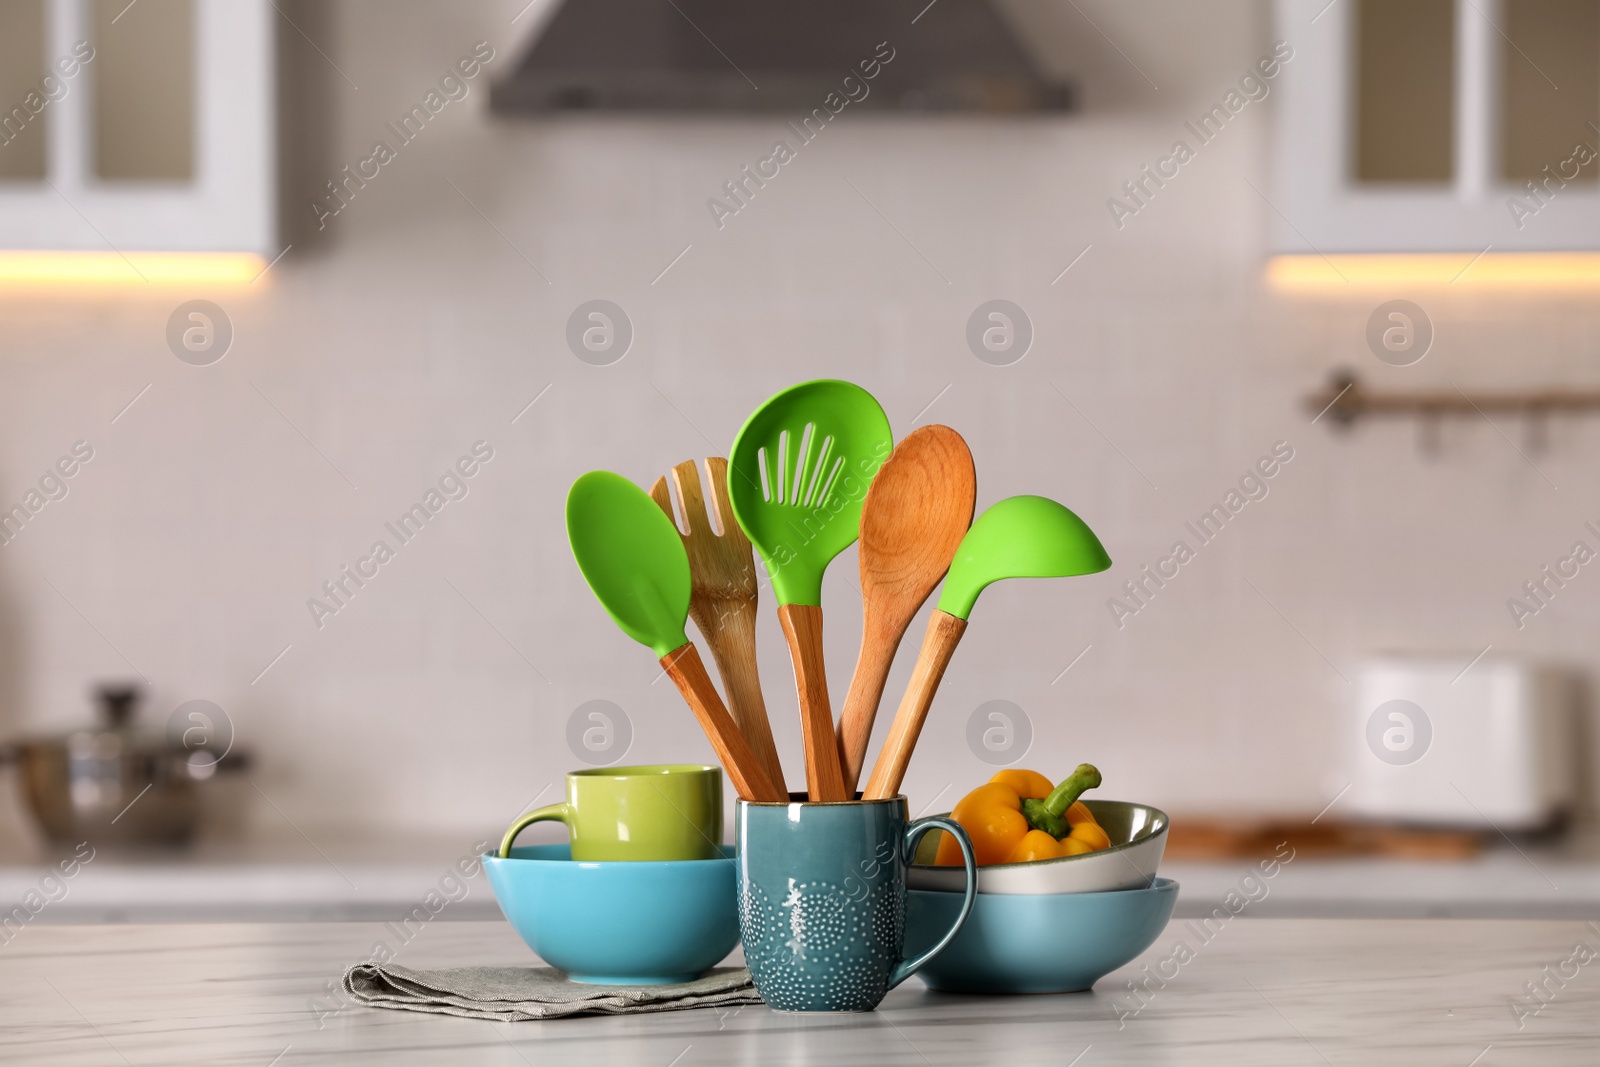 Photo of Set of different cooking utensils and ceramic dishes on white table in kitchen